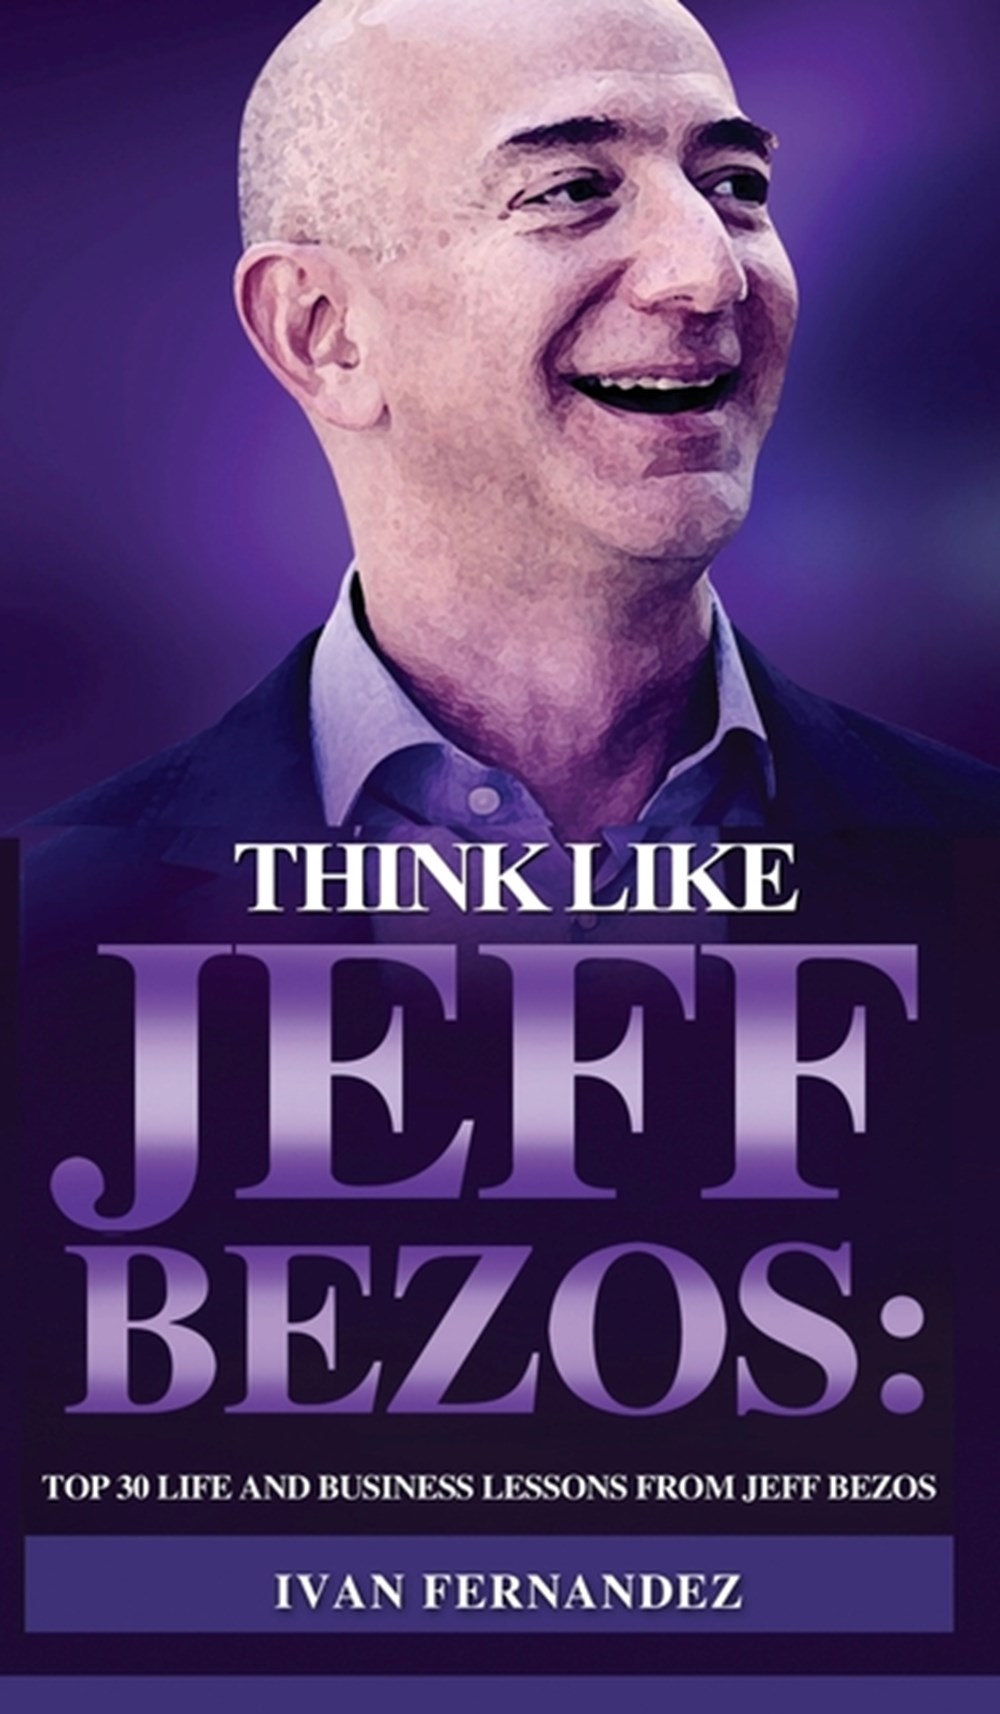 Think Like Jeff Bezos: Top 30 Life and Business Lessons from Jeff Bezos